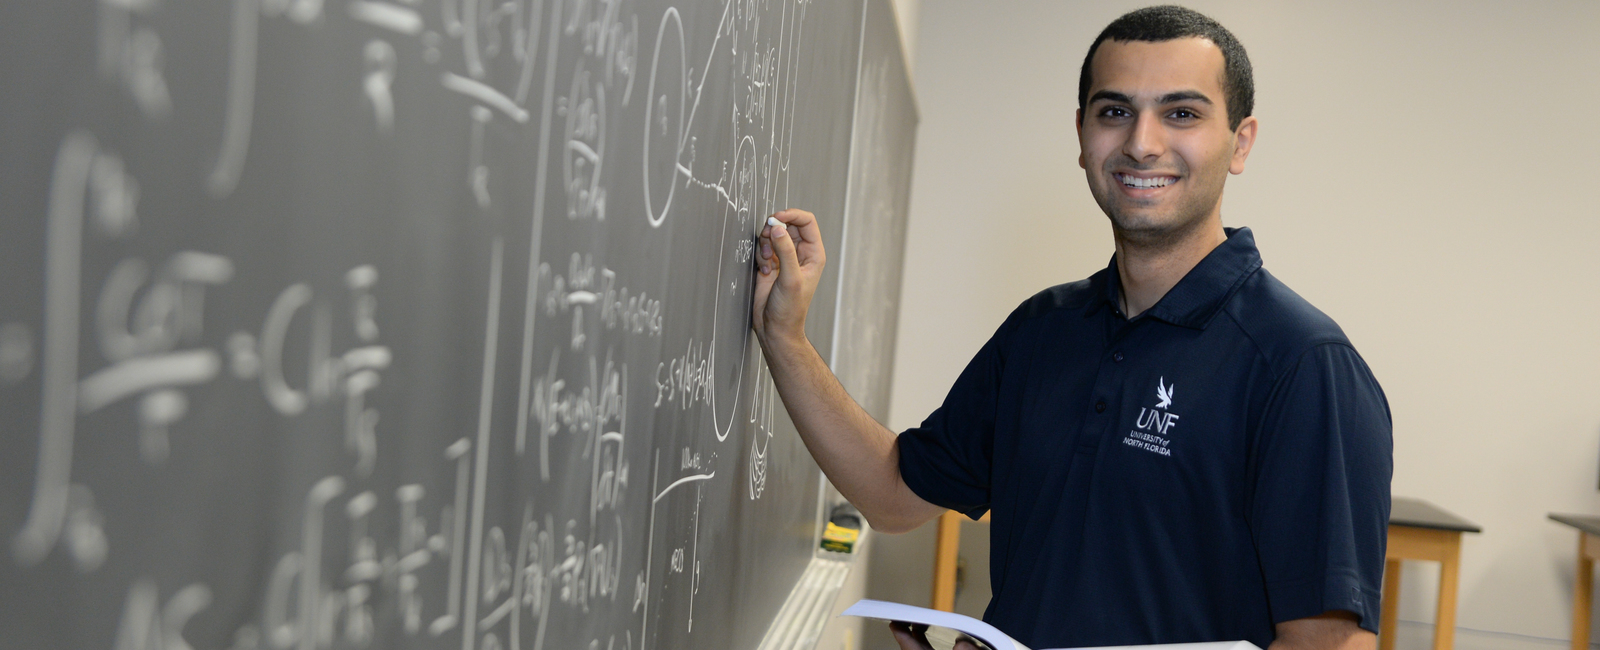 Male student in a UNF polo holding a book in front of a chalkboard with formulas written on it